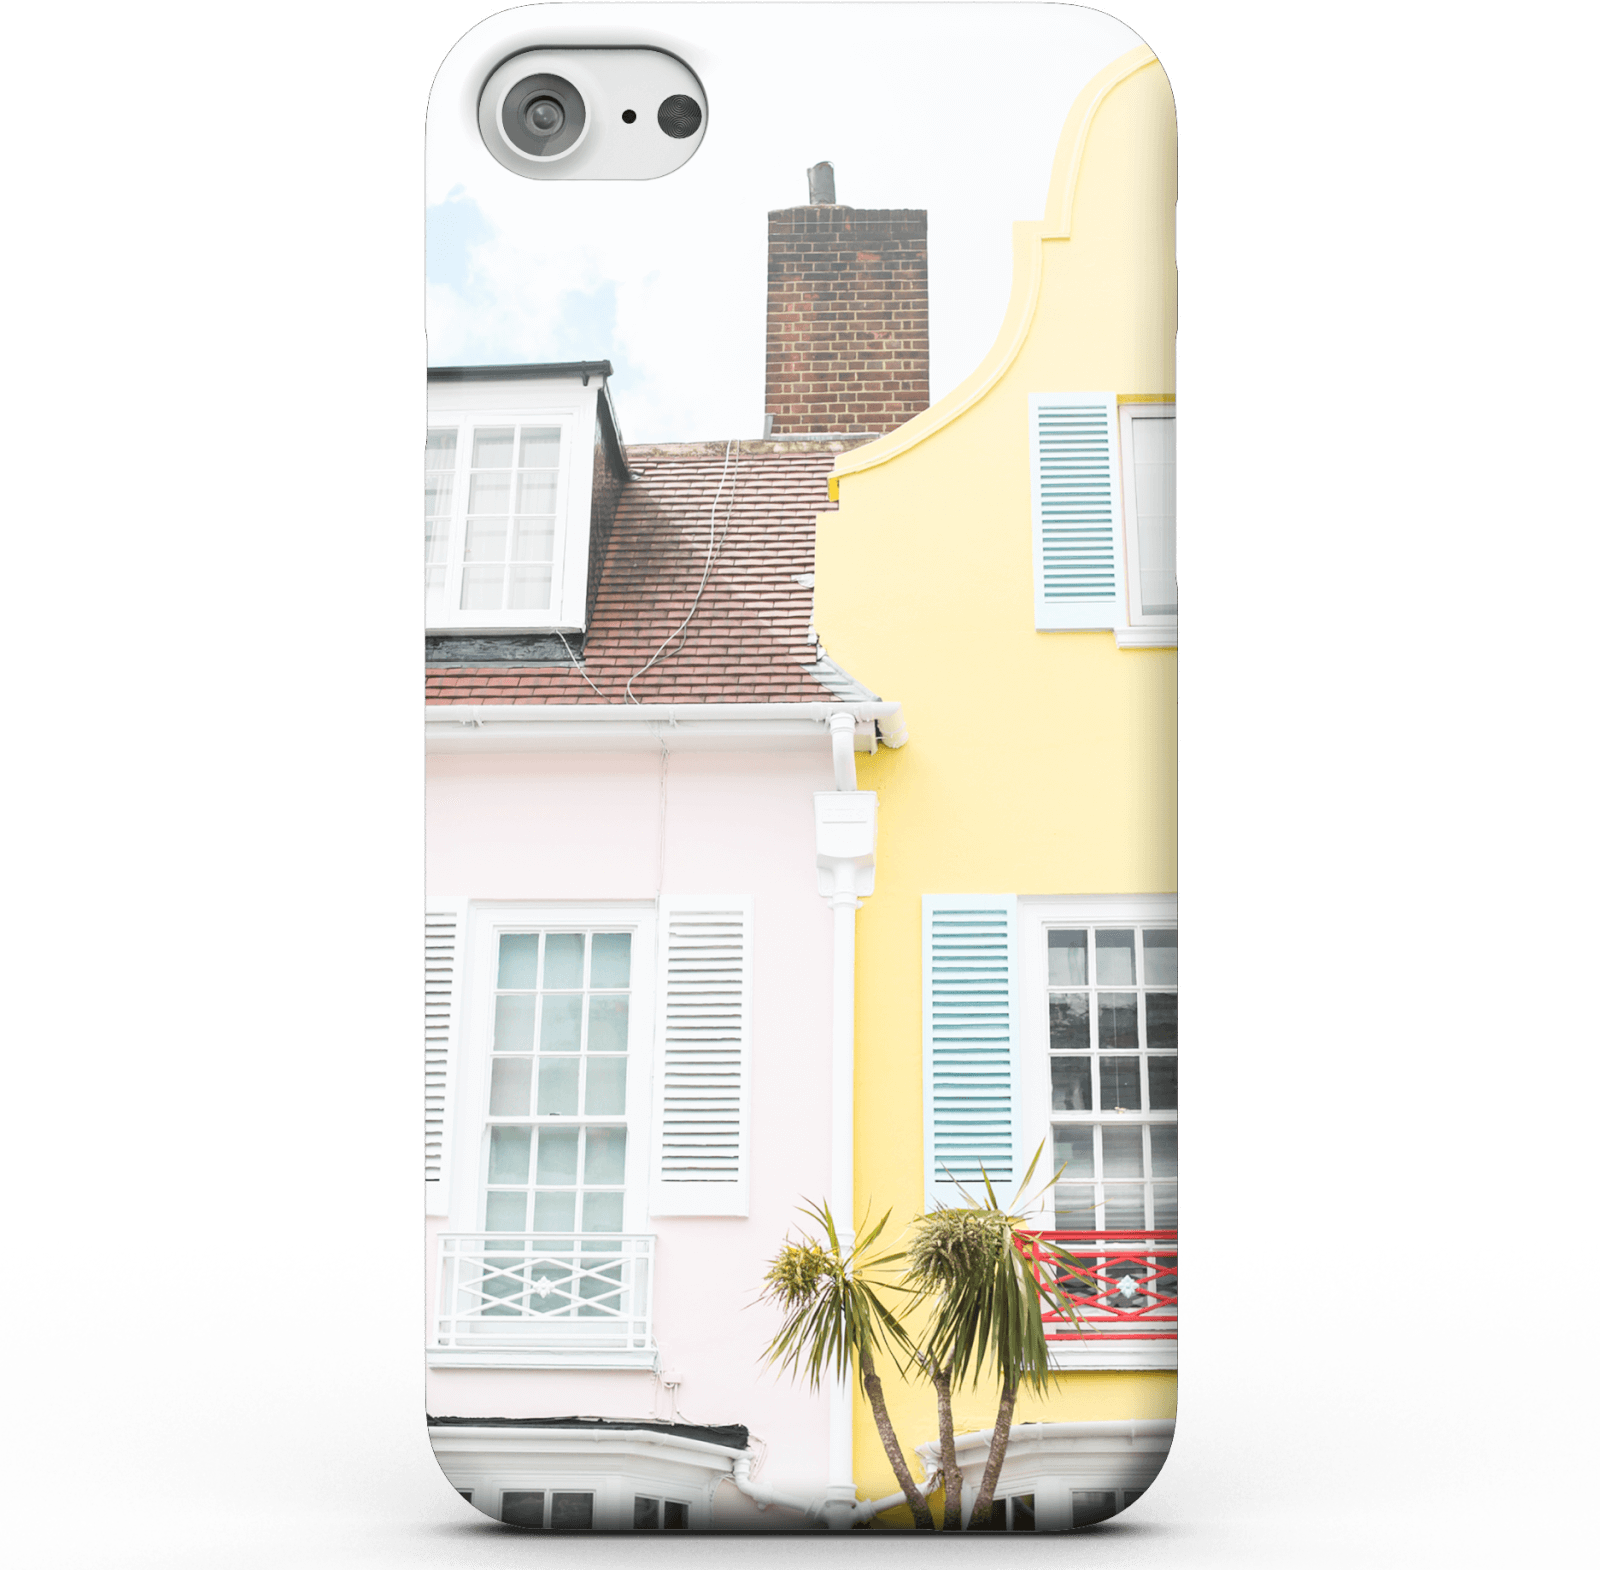 Complimentary Coloured Buildings Phone Case for iPhone and Android - iPhone 5/5s - Snap Case - Matte